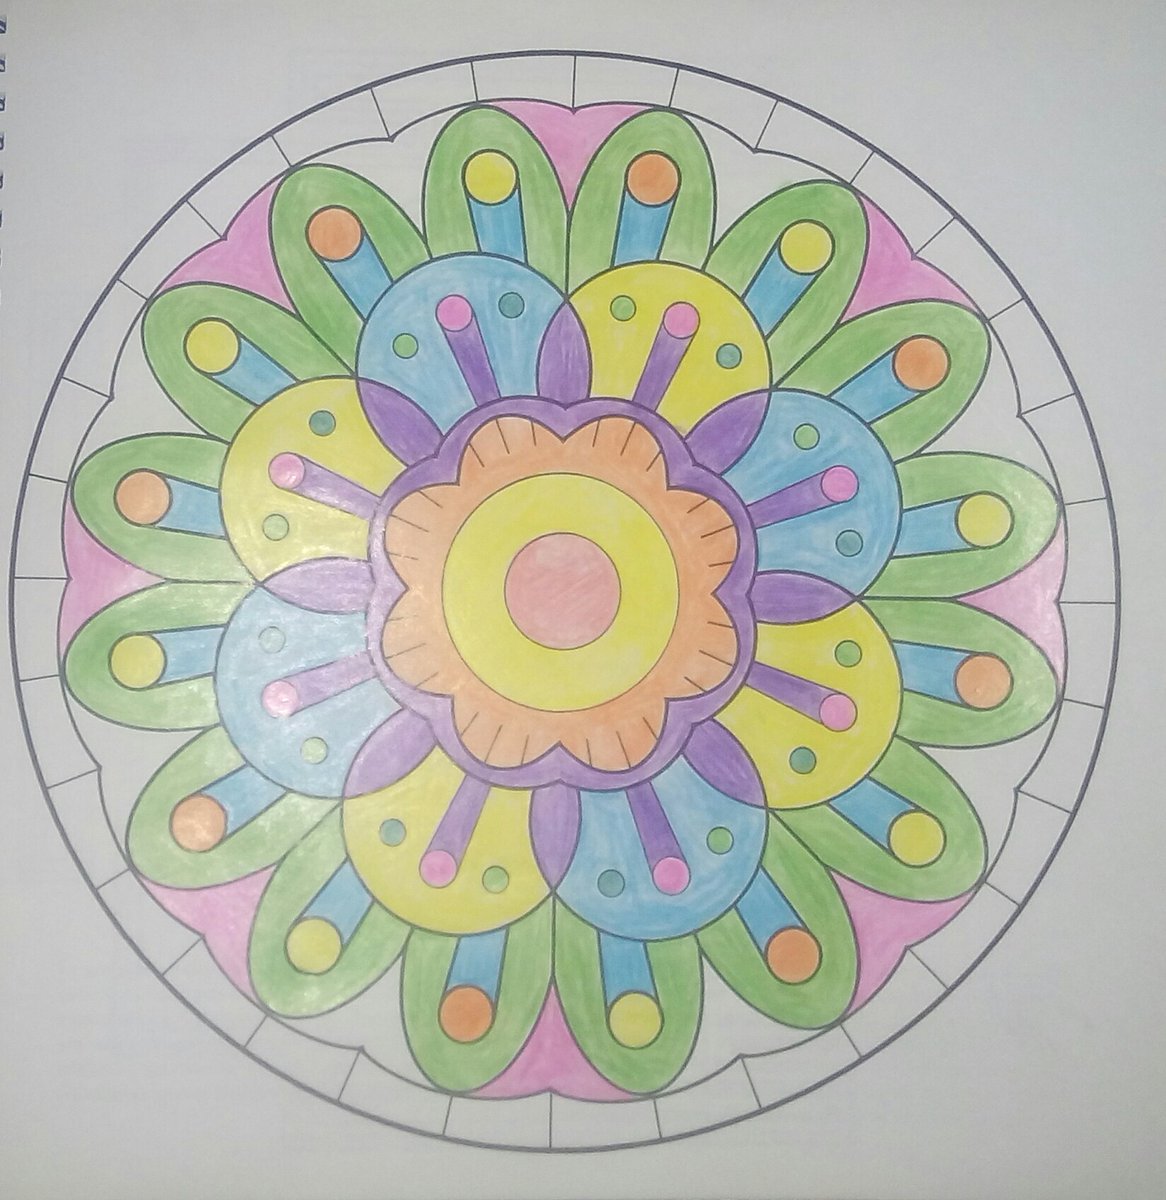 Coloring mandalas is a great way to ease stress. You can finish in one seating or complete over time. You can even color multiples! Color w/someone, in silence or while chatting; there are no rules.Search "mandalas" online for free, printable pages #CoronaCareKE  #CoronaCare